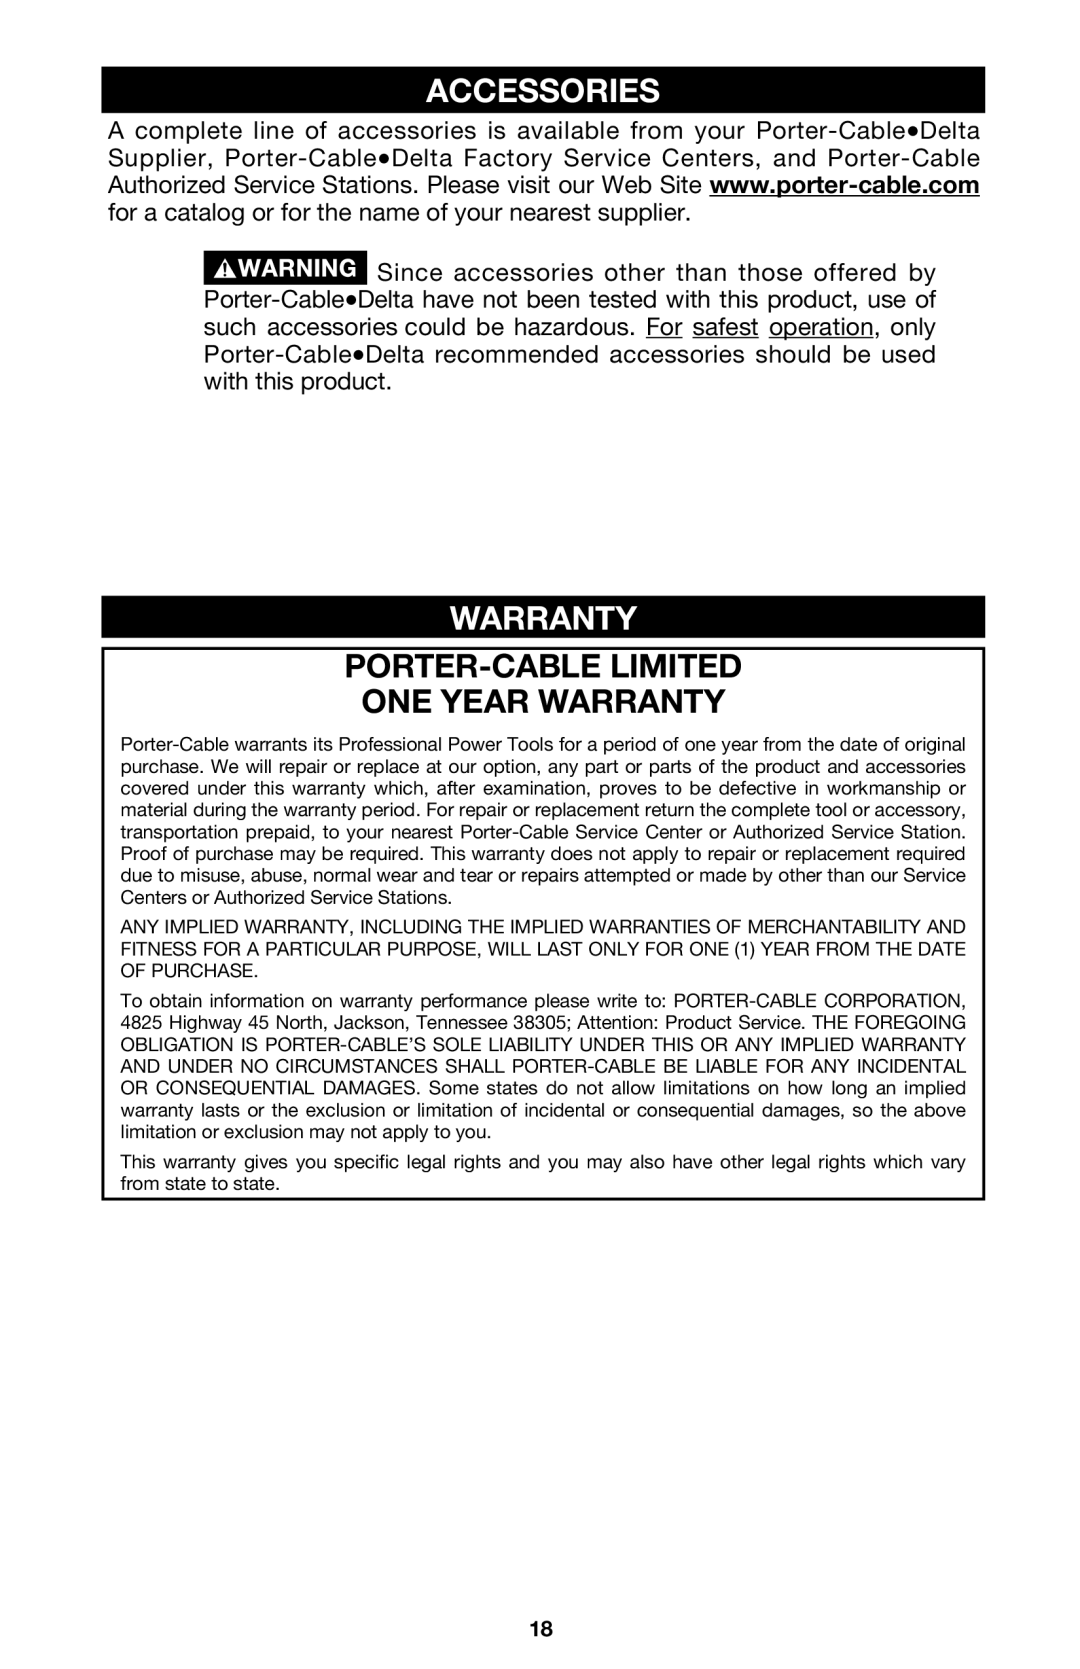 Porter-Cable 444vs instruction manual Accessories, Porter-Cable Limited One Year Warranty 